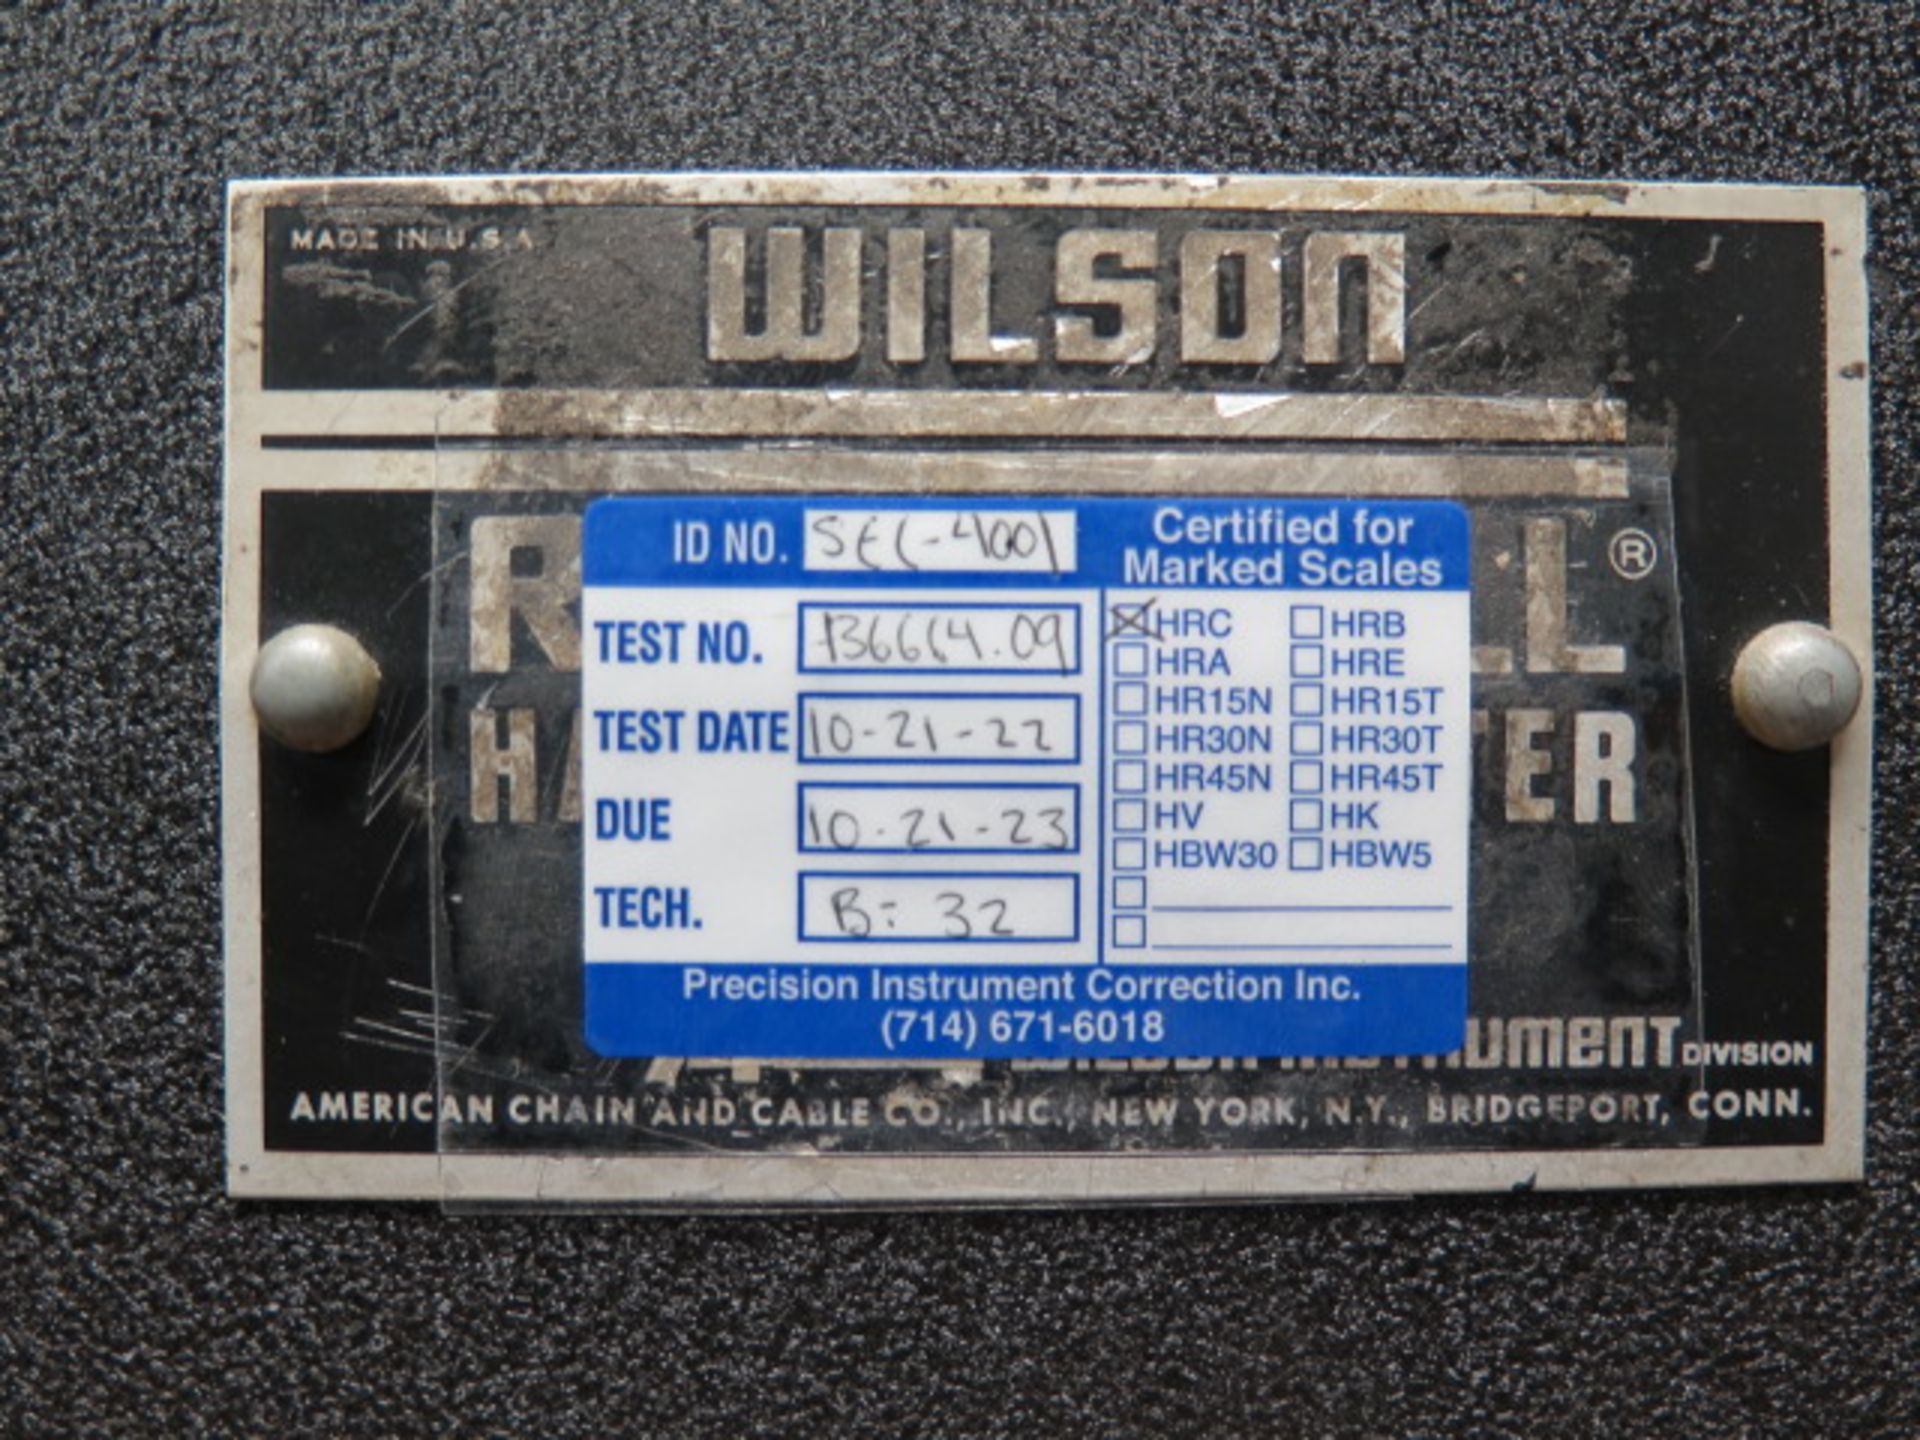 Wilson 4JR UBB Rockwell Hardness Tester s/n 7972 (SOLD AS-IS - NO WARRANTY) - Image 8 of 9